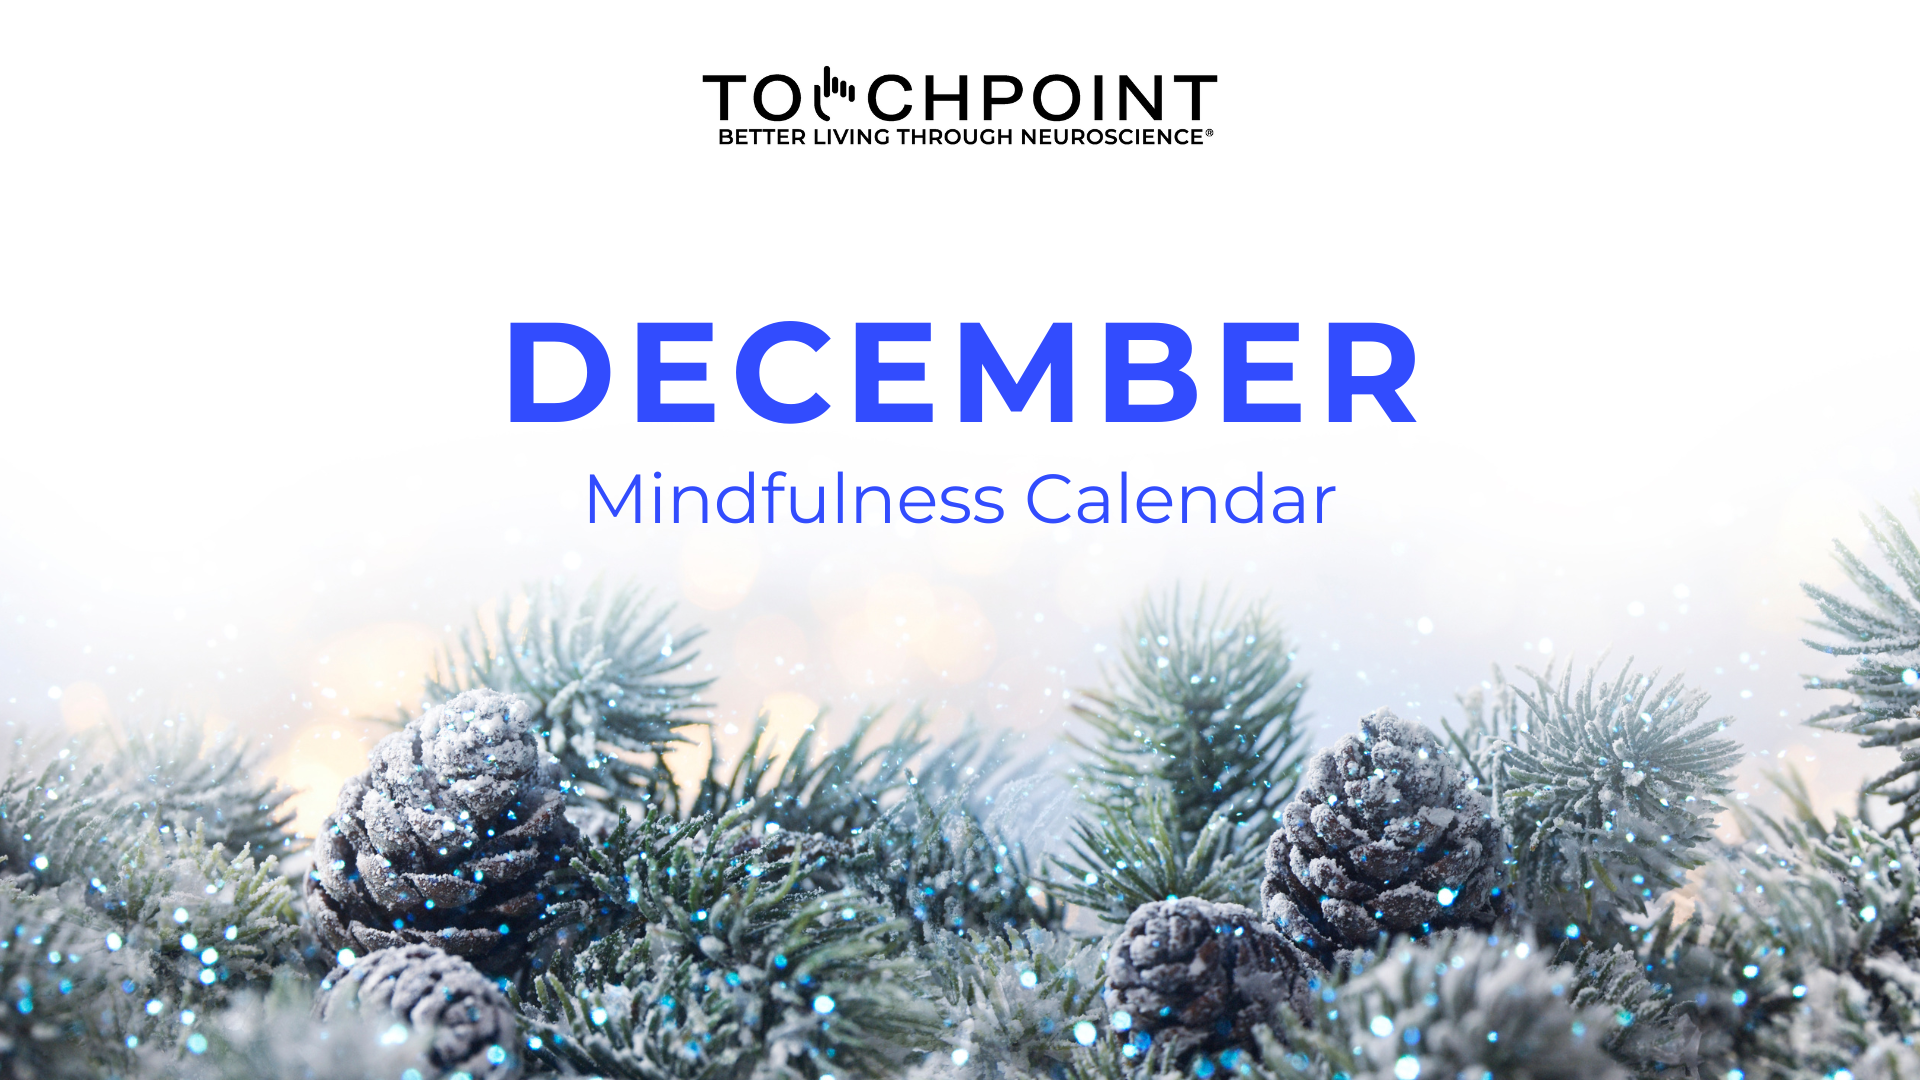 The December 2022 Mindfulness Calendar is Here!